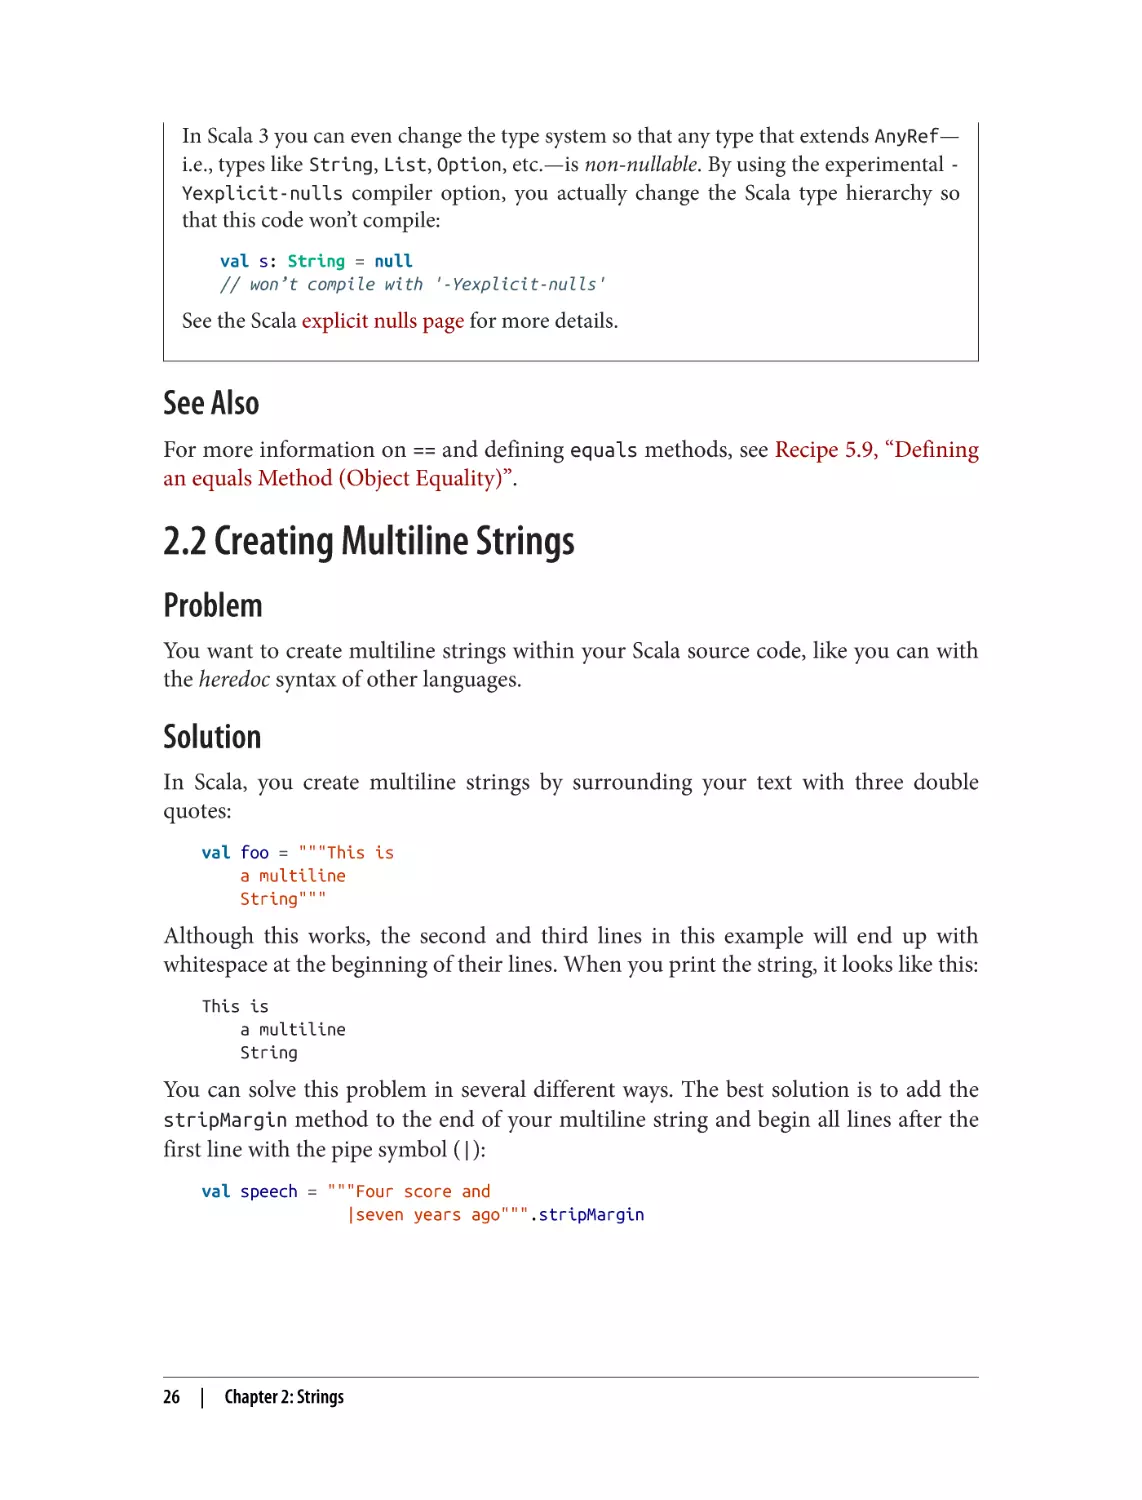 See Also
2.2 Creating Multiline Strings
Problem
Solution